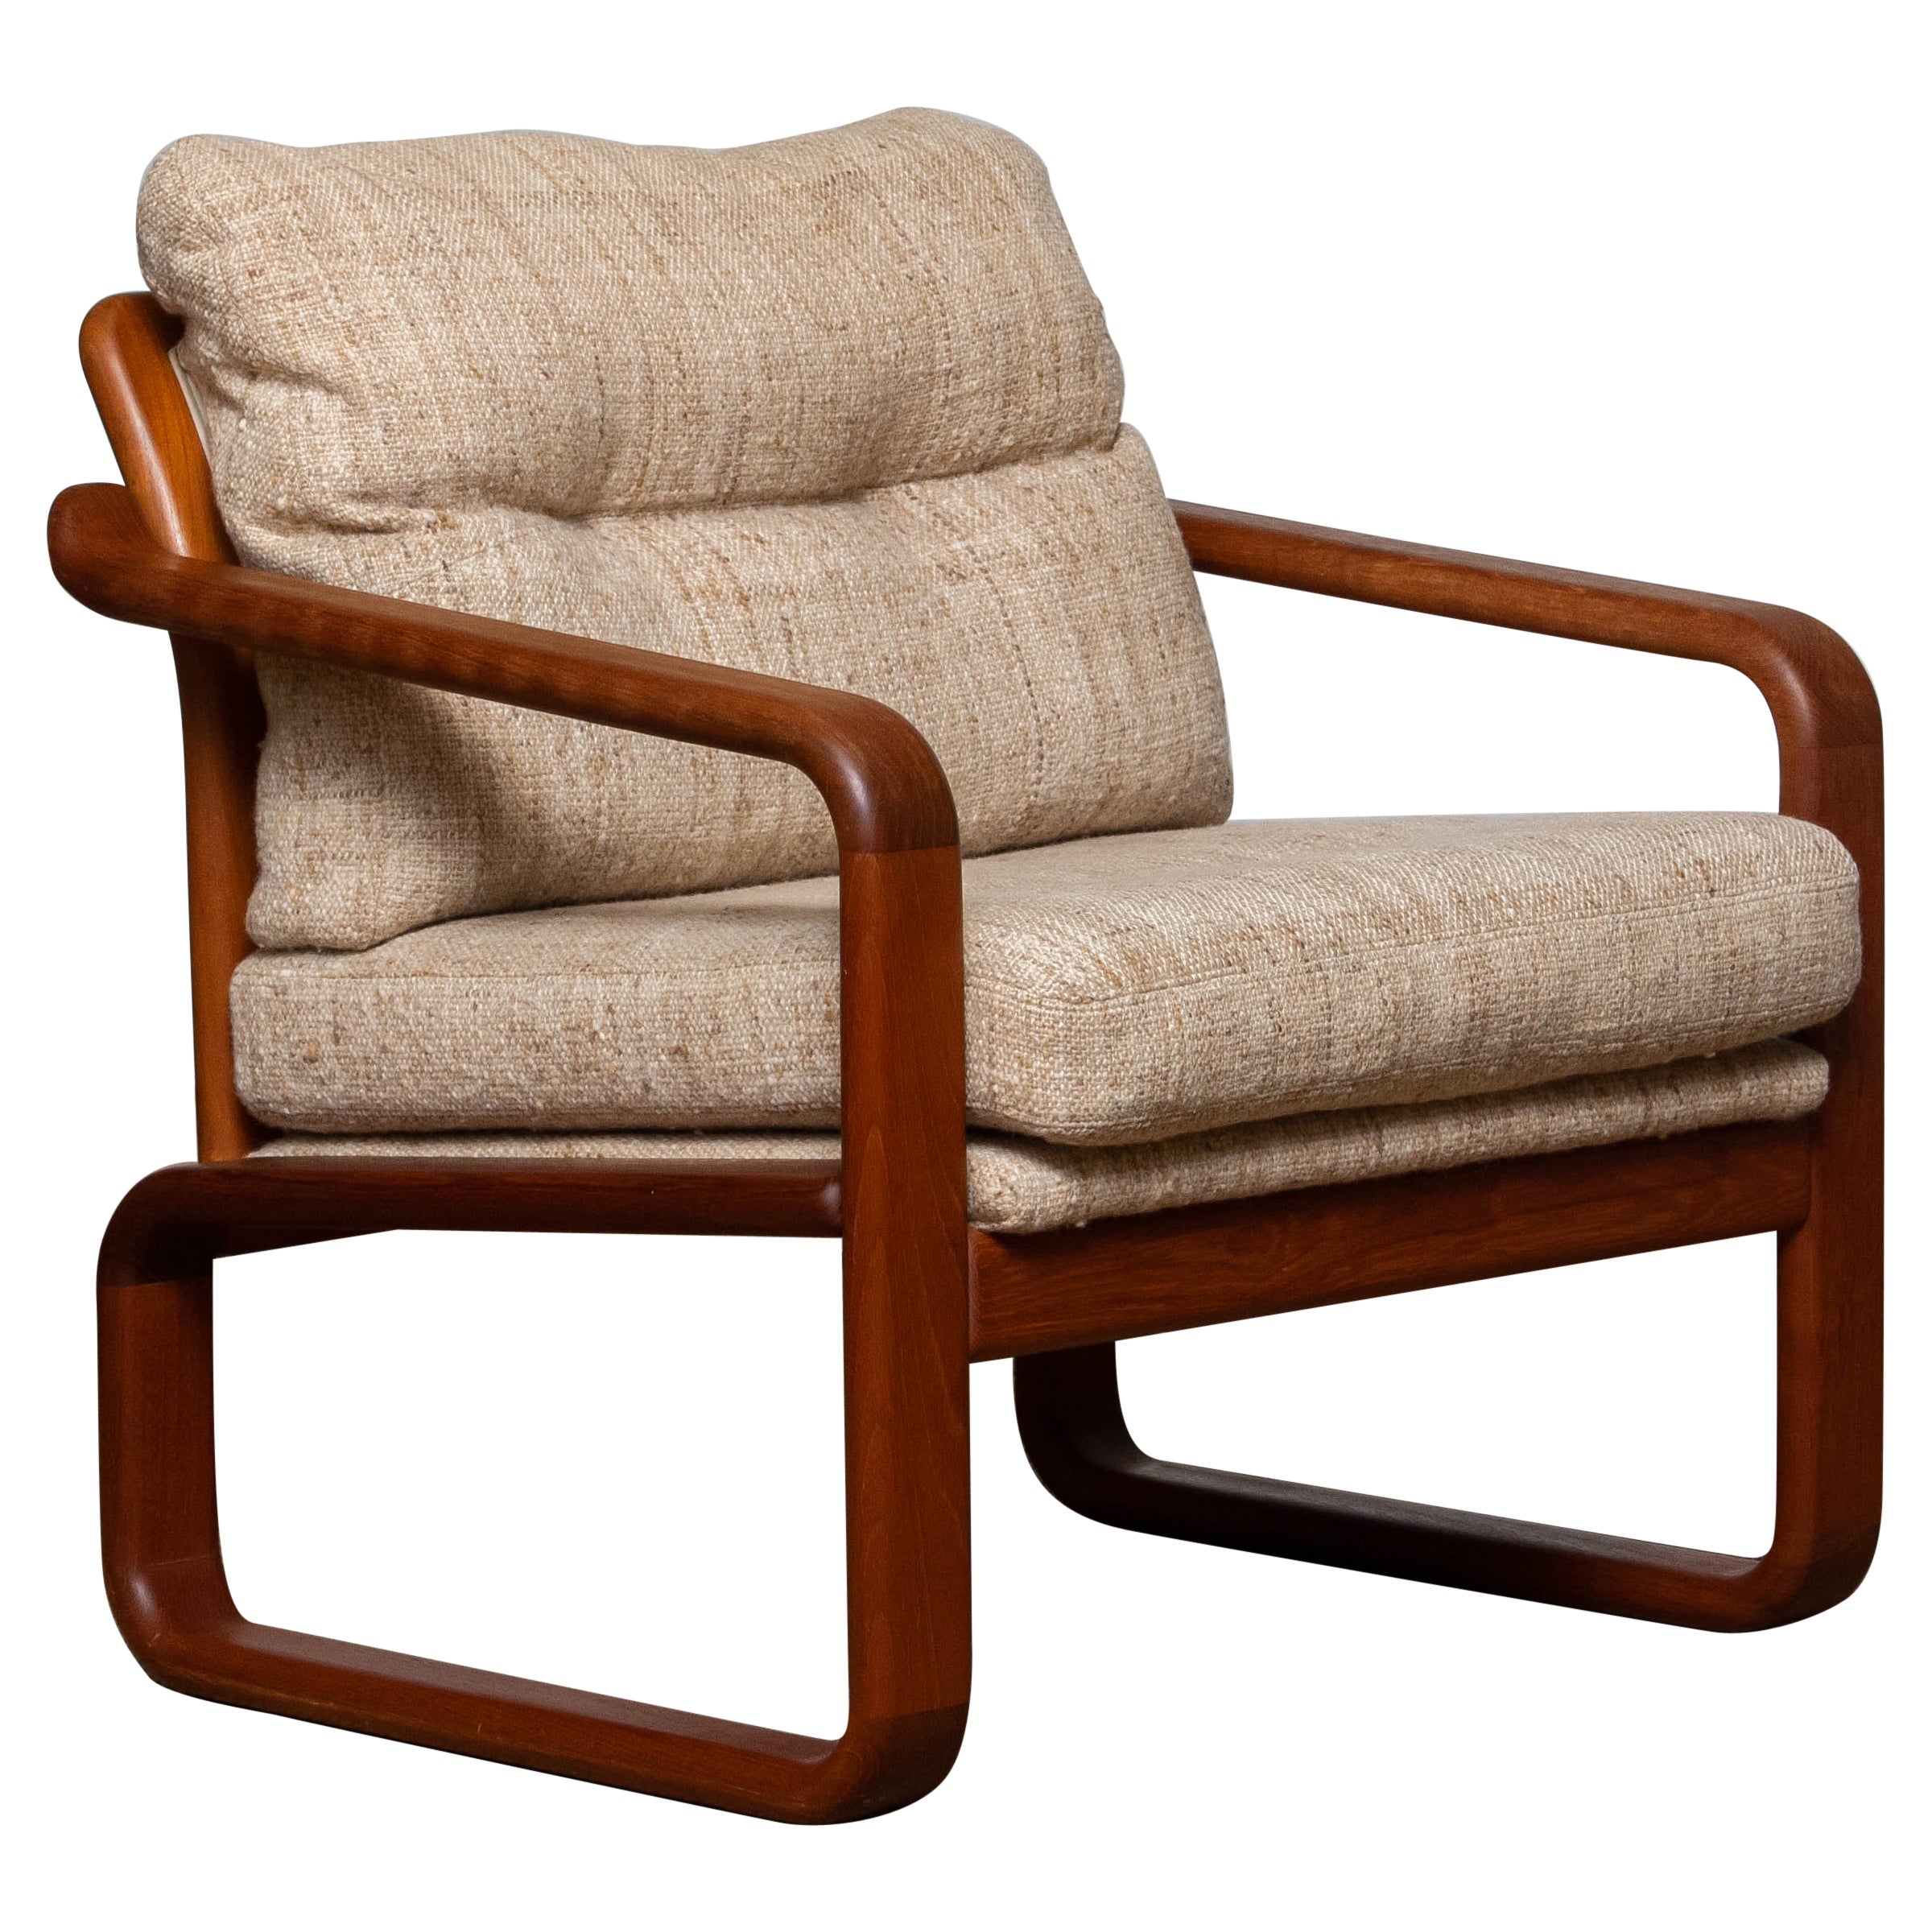 1980's Teak with Wool Cushions Lounge / Easy / Club Chair by HS Design Denmark